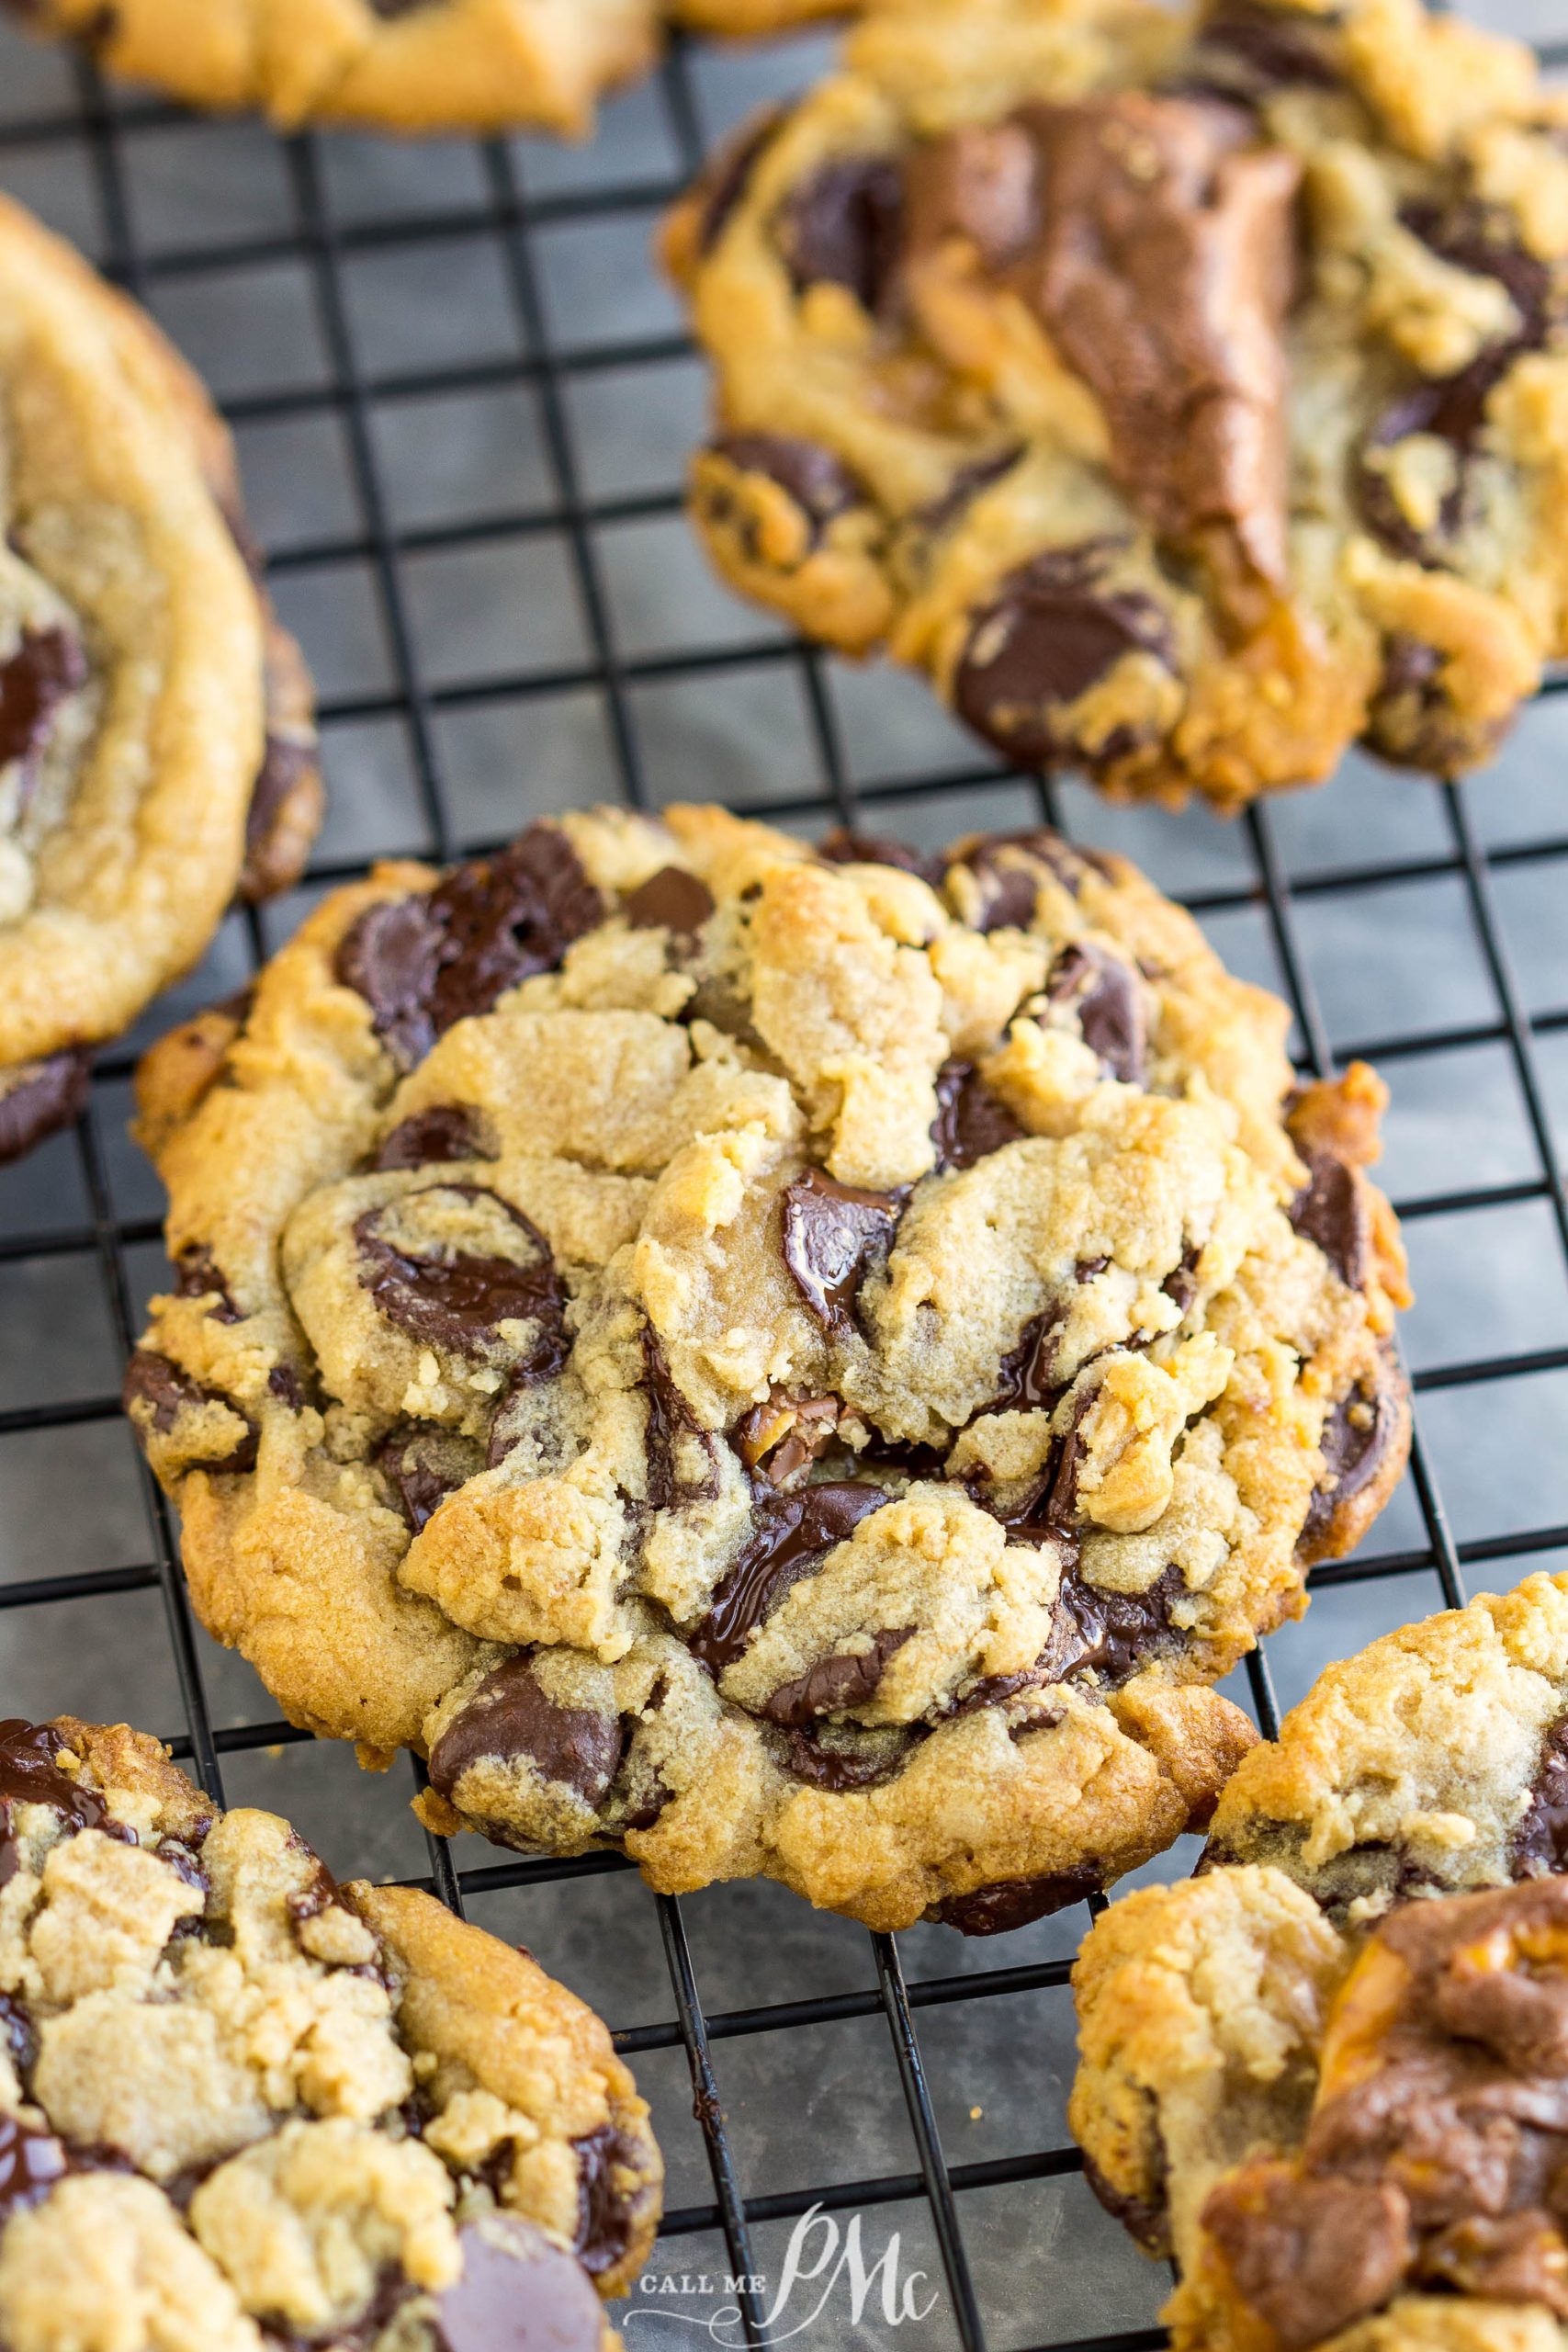 Chocolate Chip Snickers Cookies